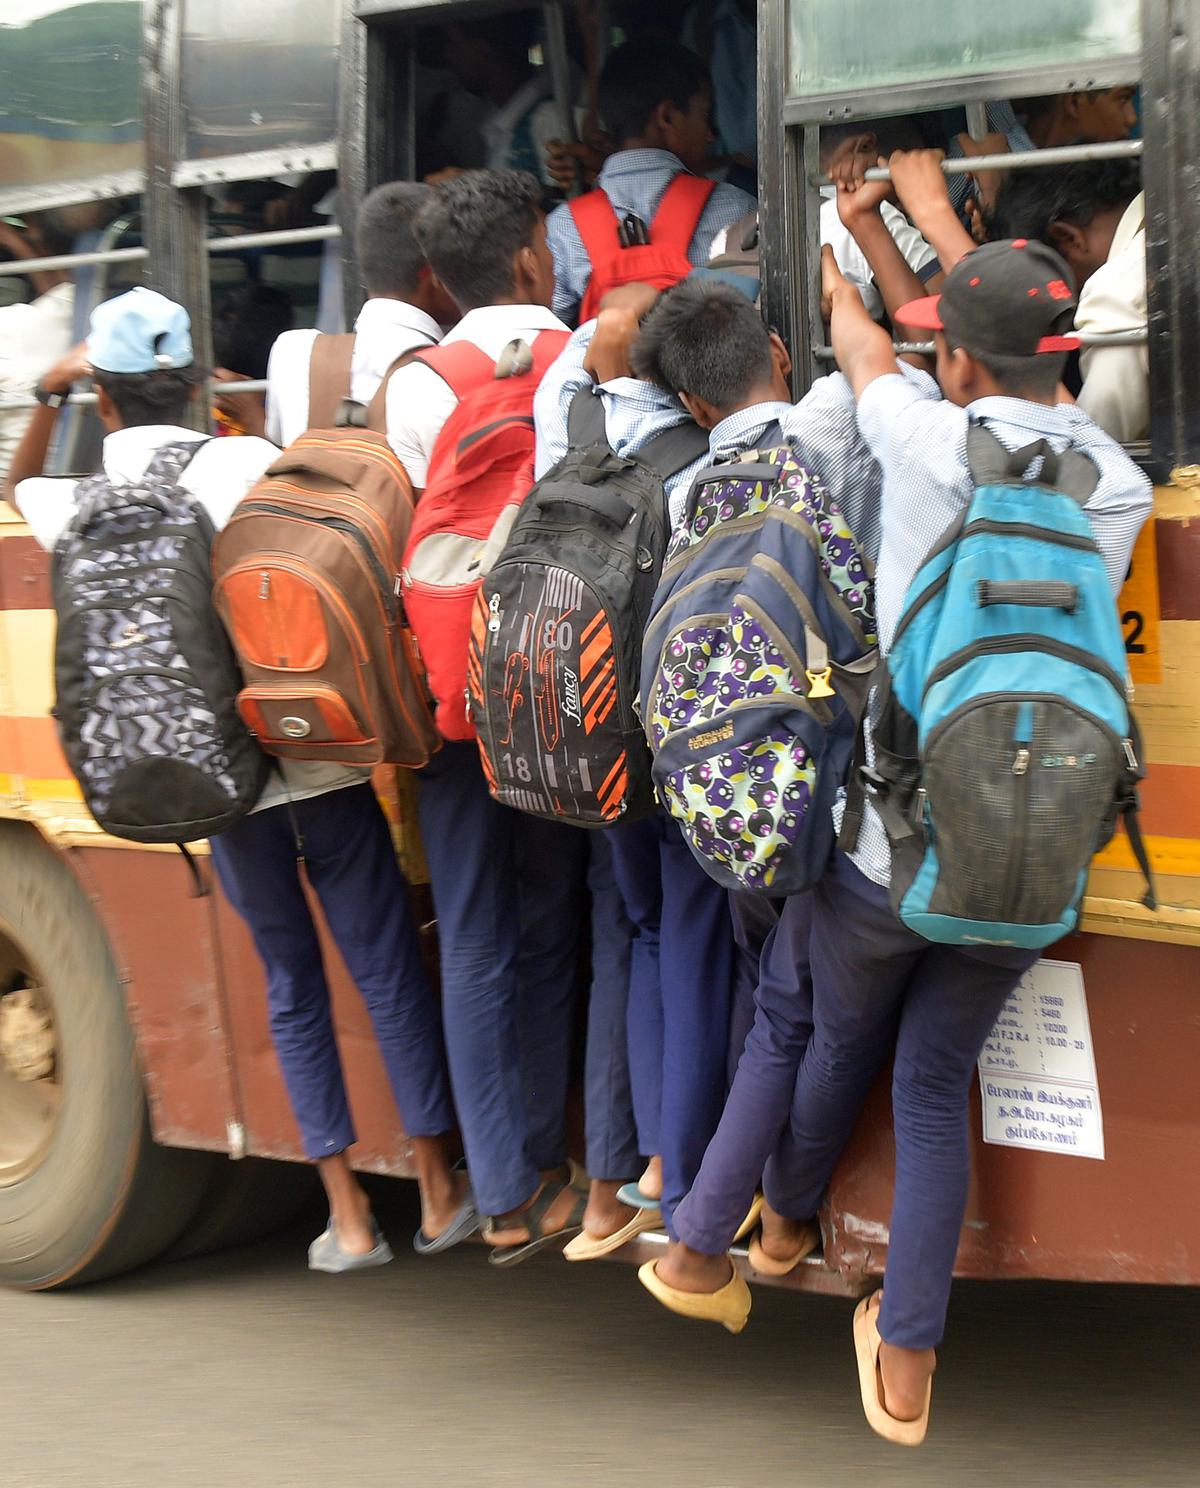 Footboard travel in buses, a common sight in Tiruchi